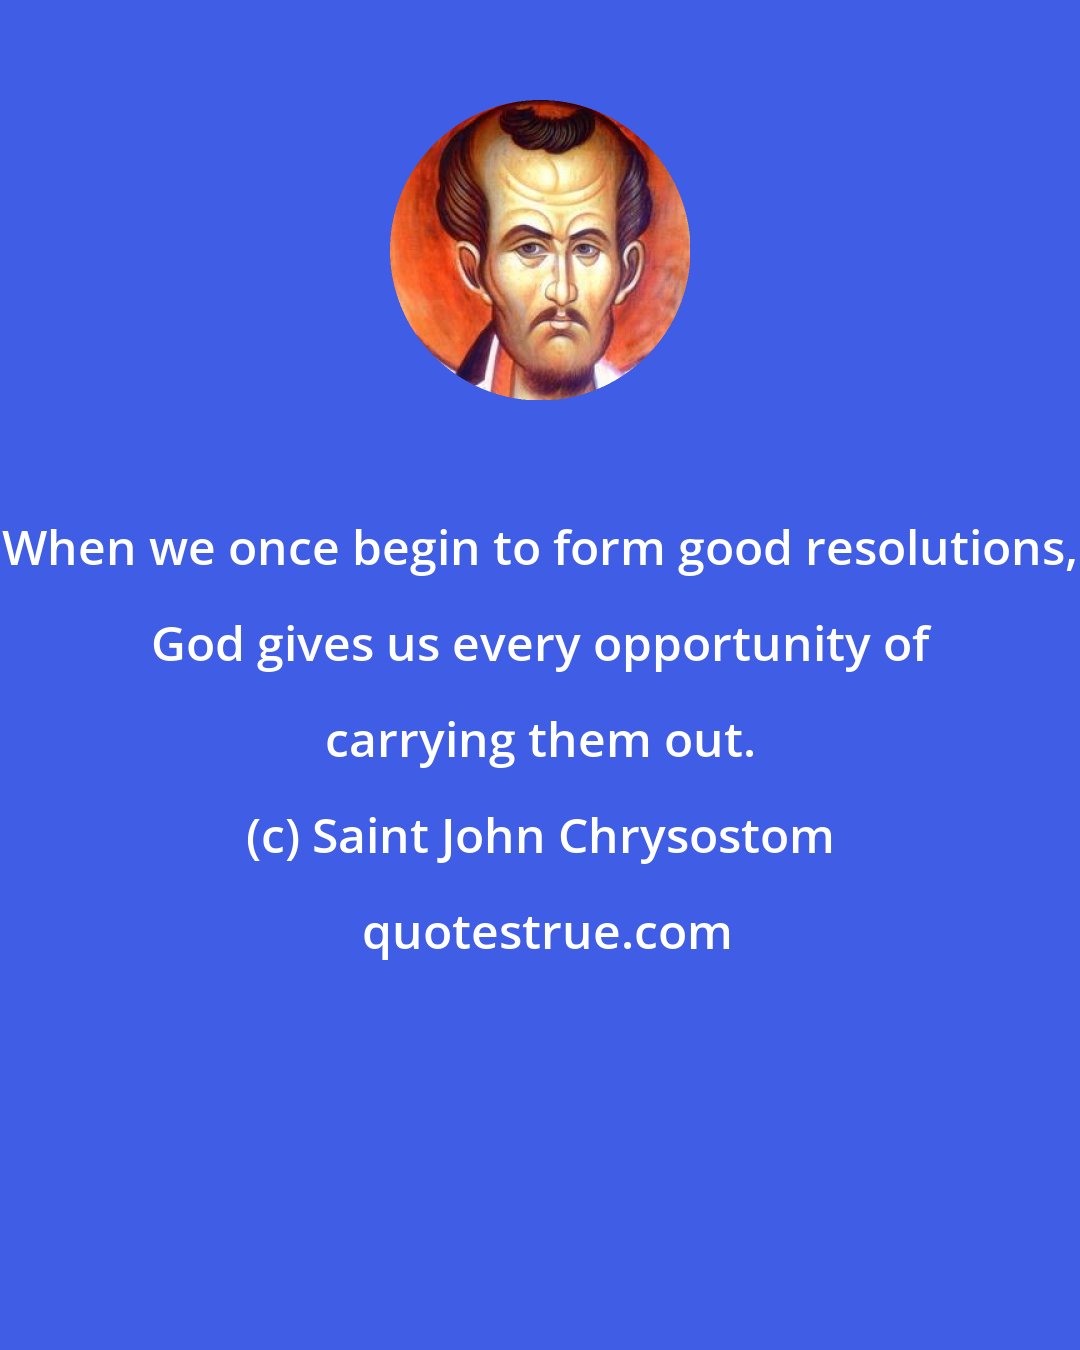 Saint John Chrysostom: When we once begin to form good resolutions, God gives us every opportunity of carrying them out.